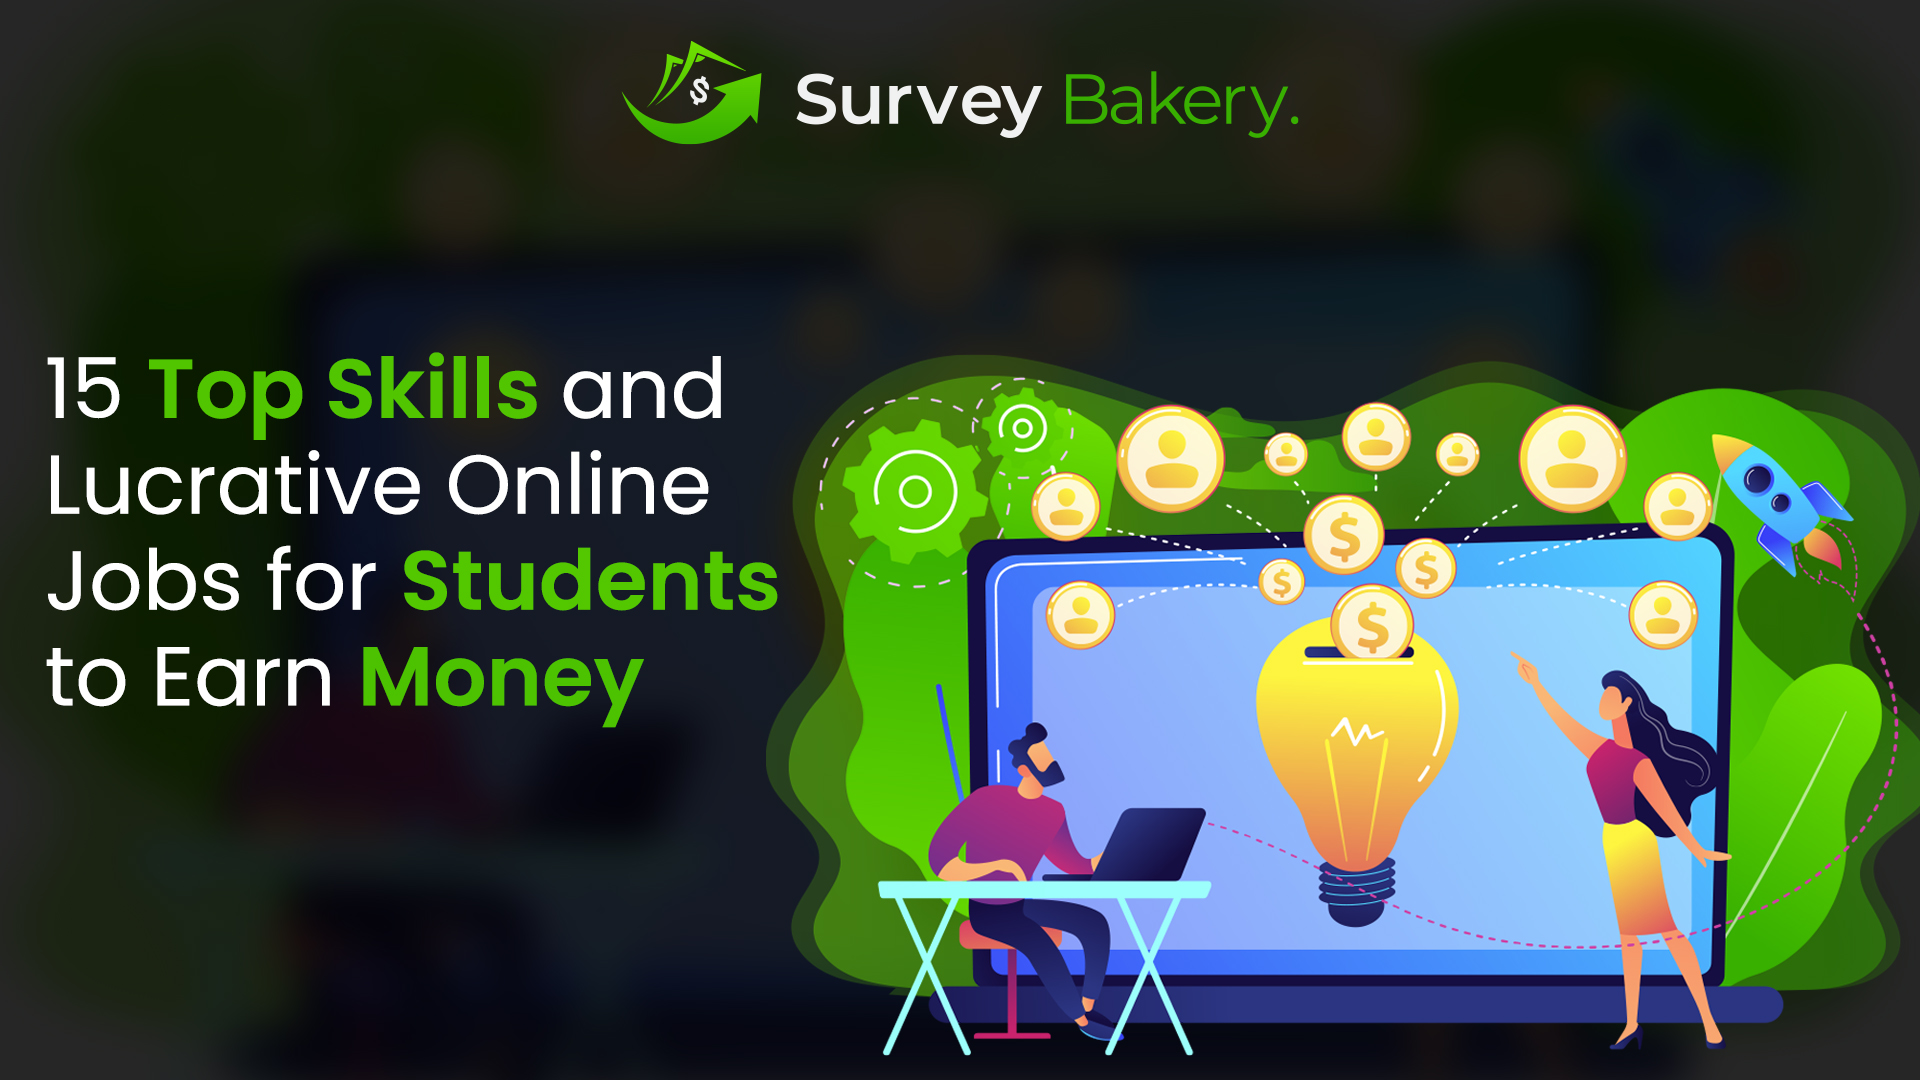 You are currently viewing 15 Top Skills and Lucrative Online Jobs for Students to Earn Money